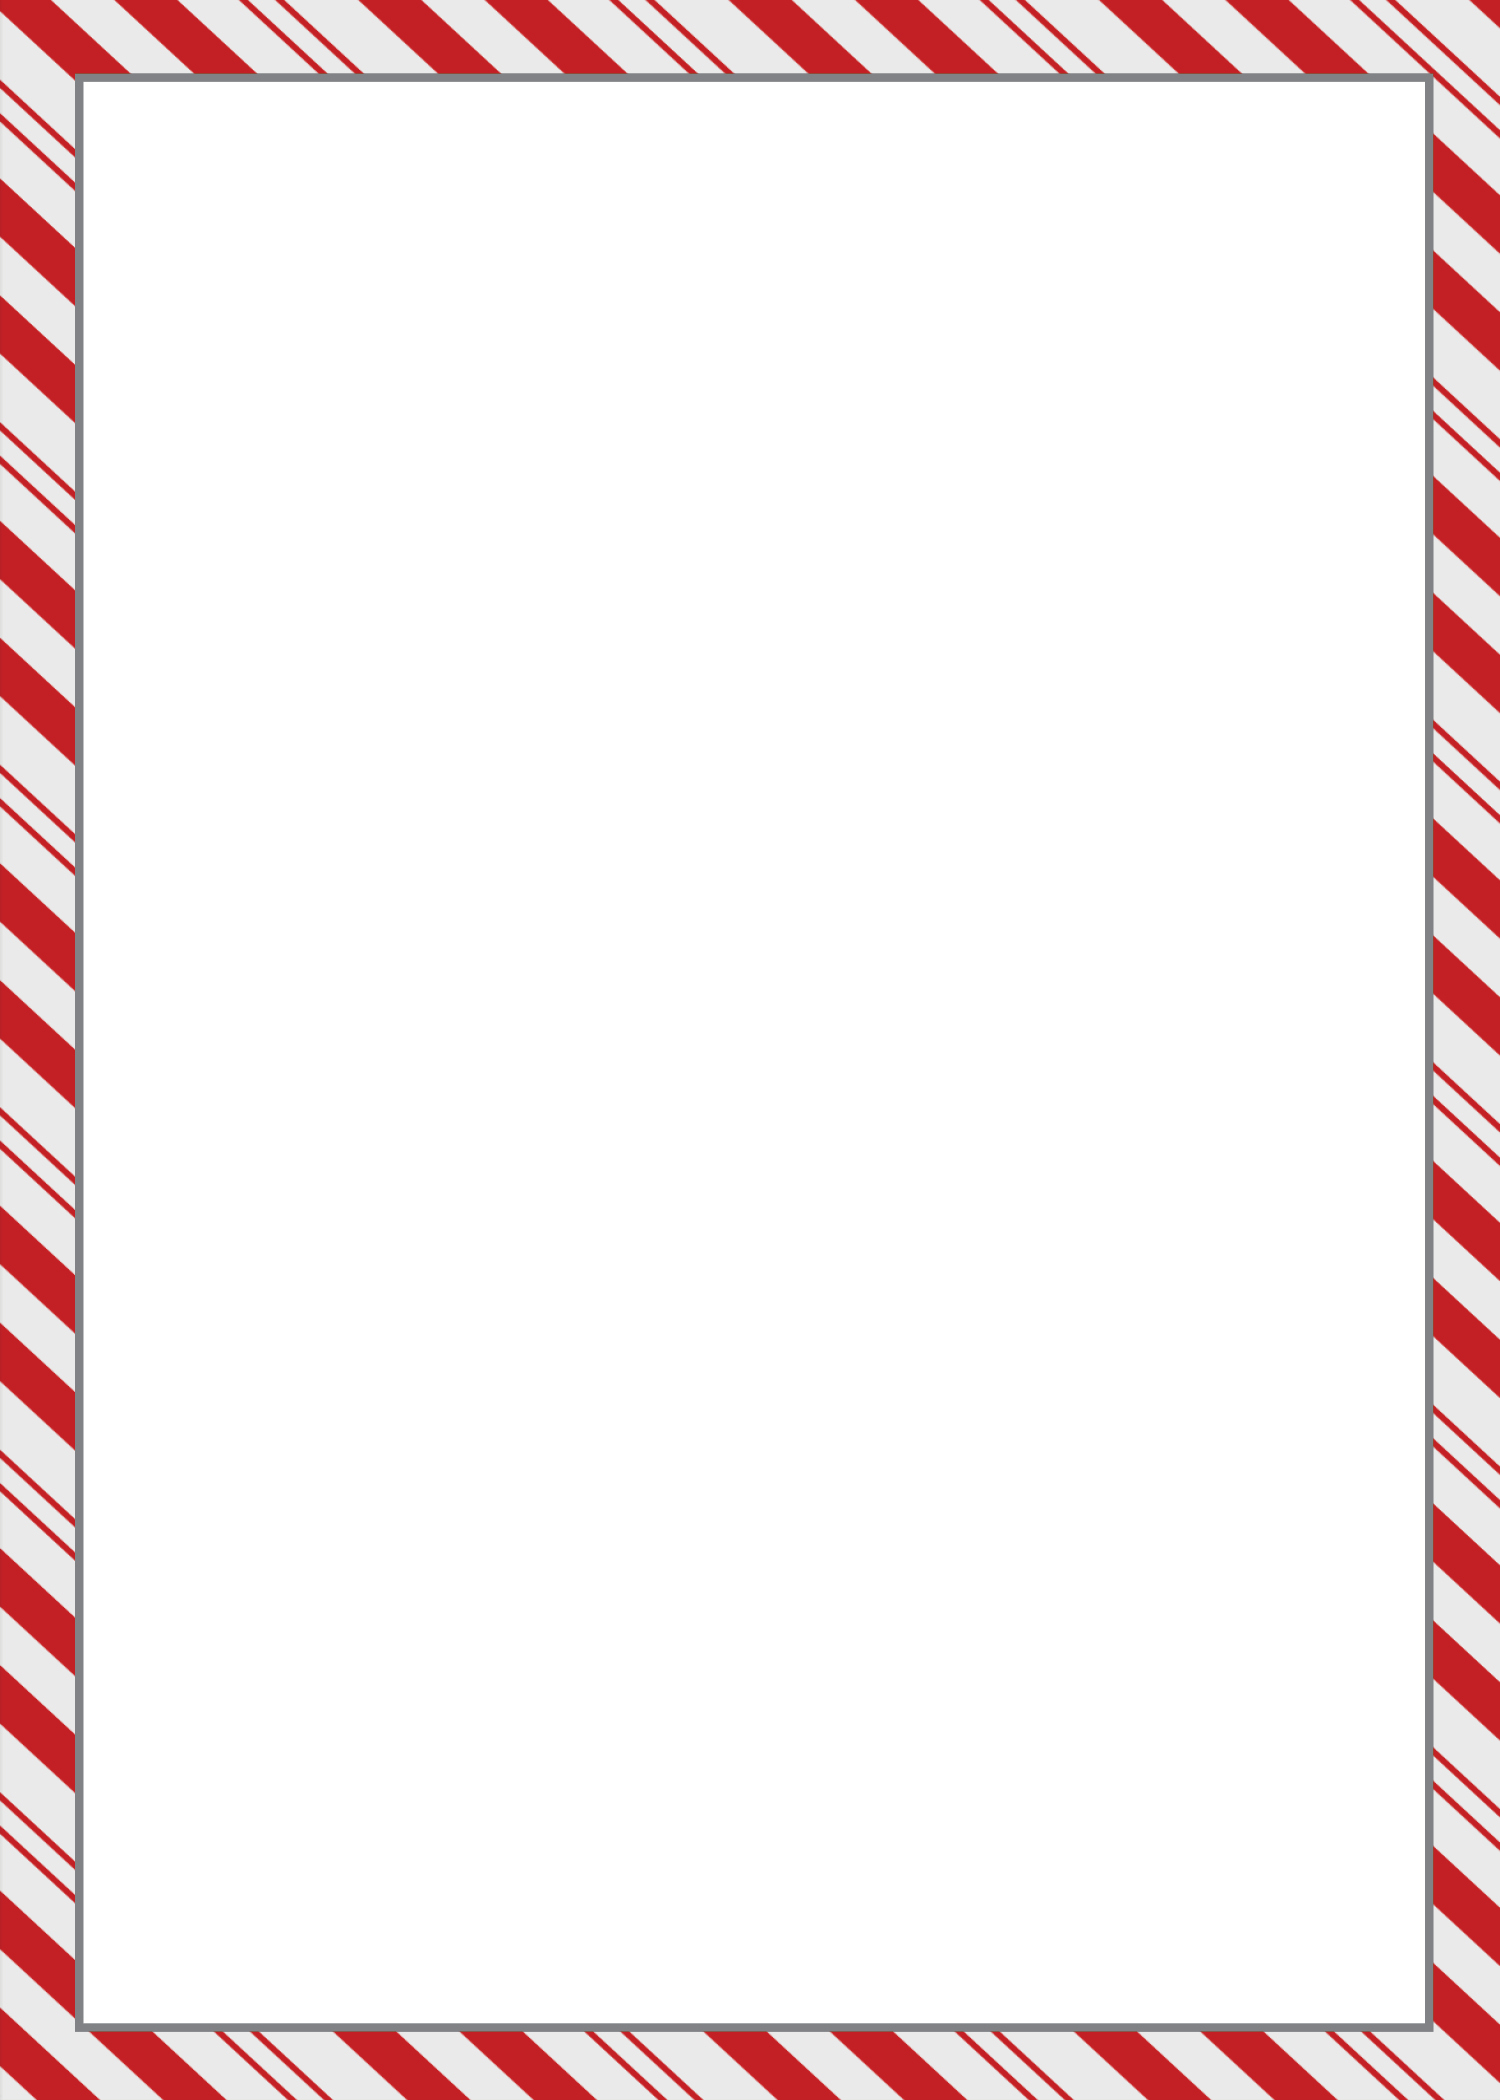 Candy Cane Borders 512 X 512 